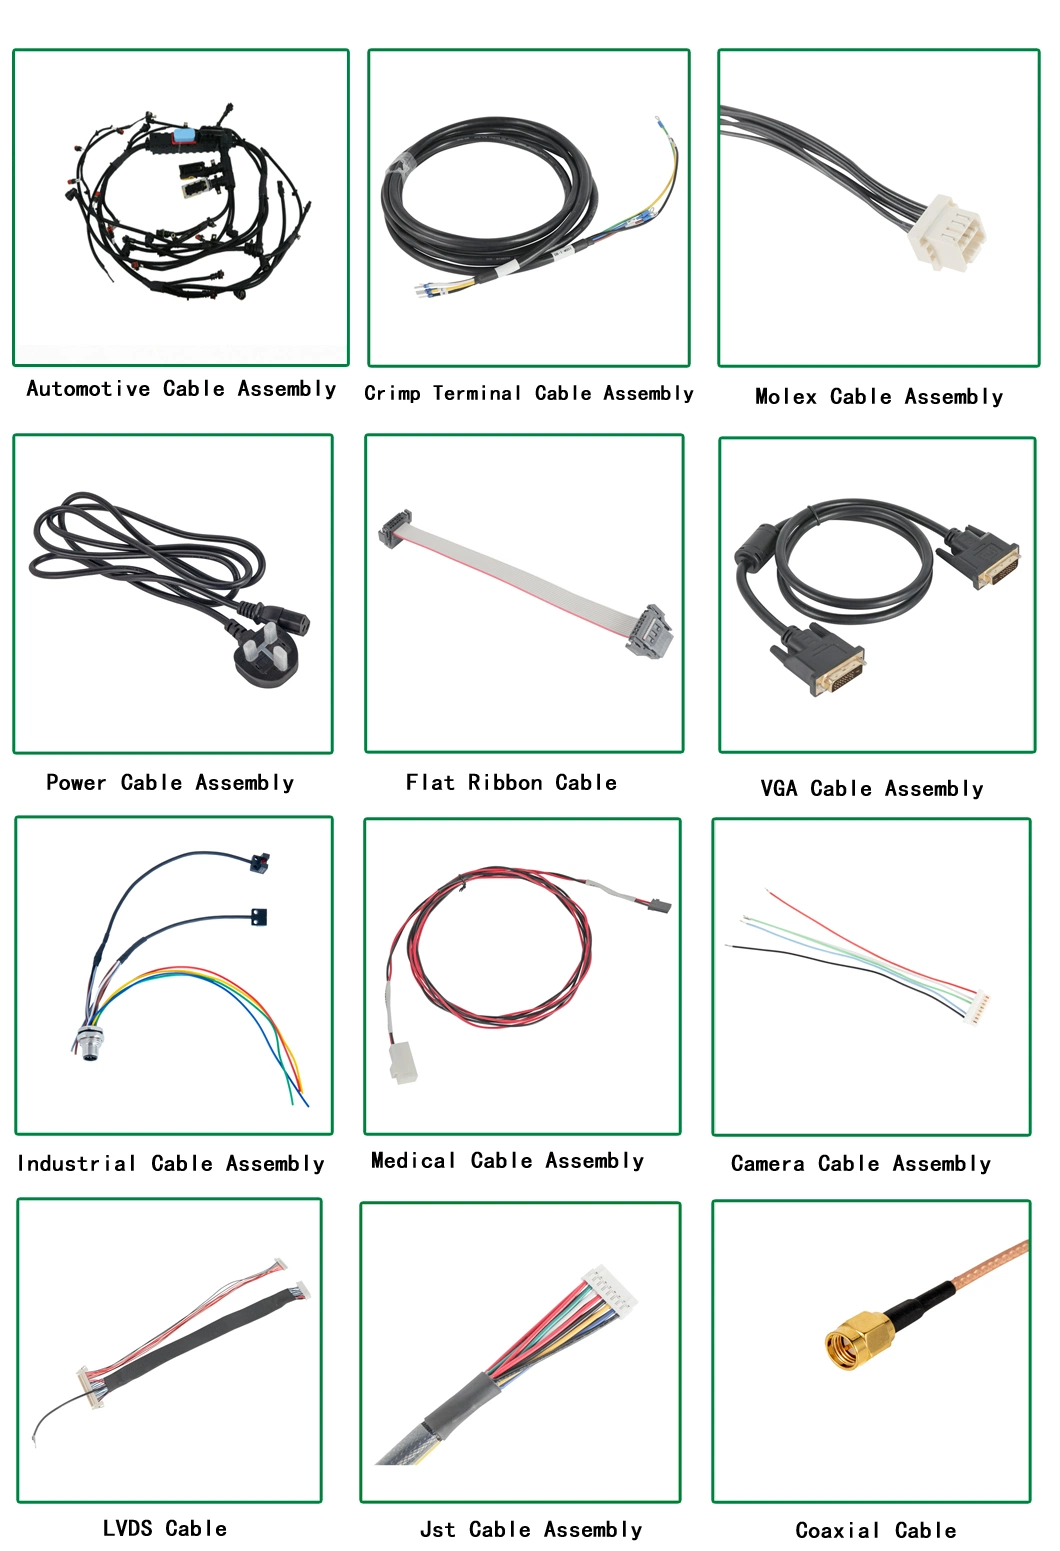 Cable Harness Assembly Electrical Wire and Cable Automotive Wire Harness Assembly for Automobile Automotive Equipment